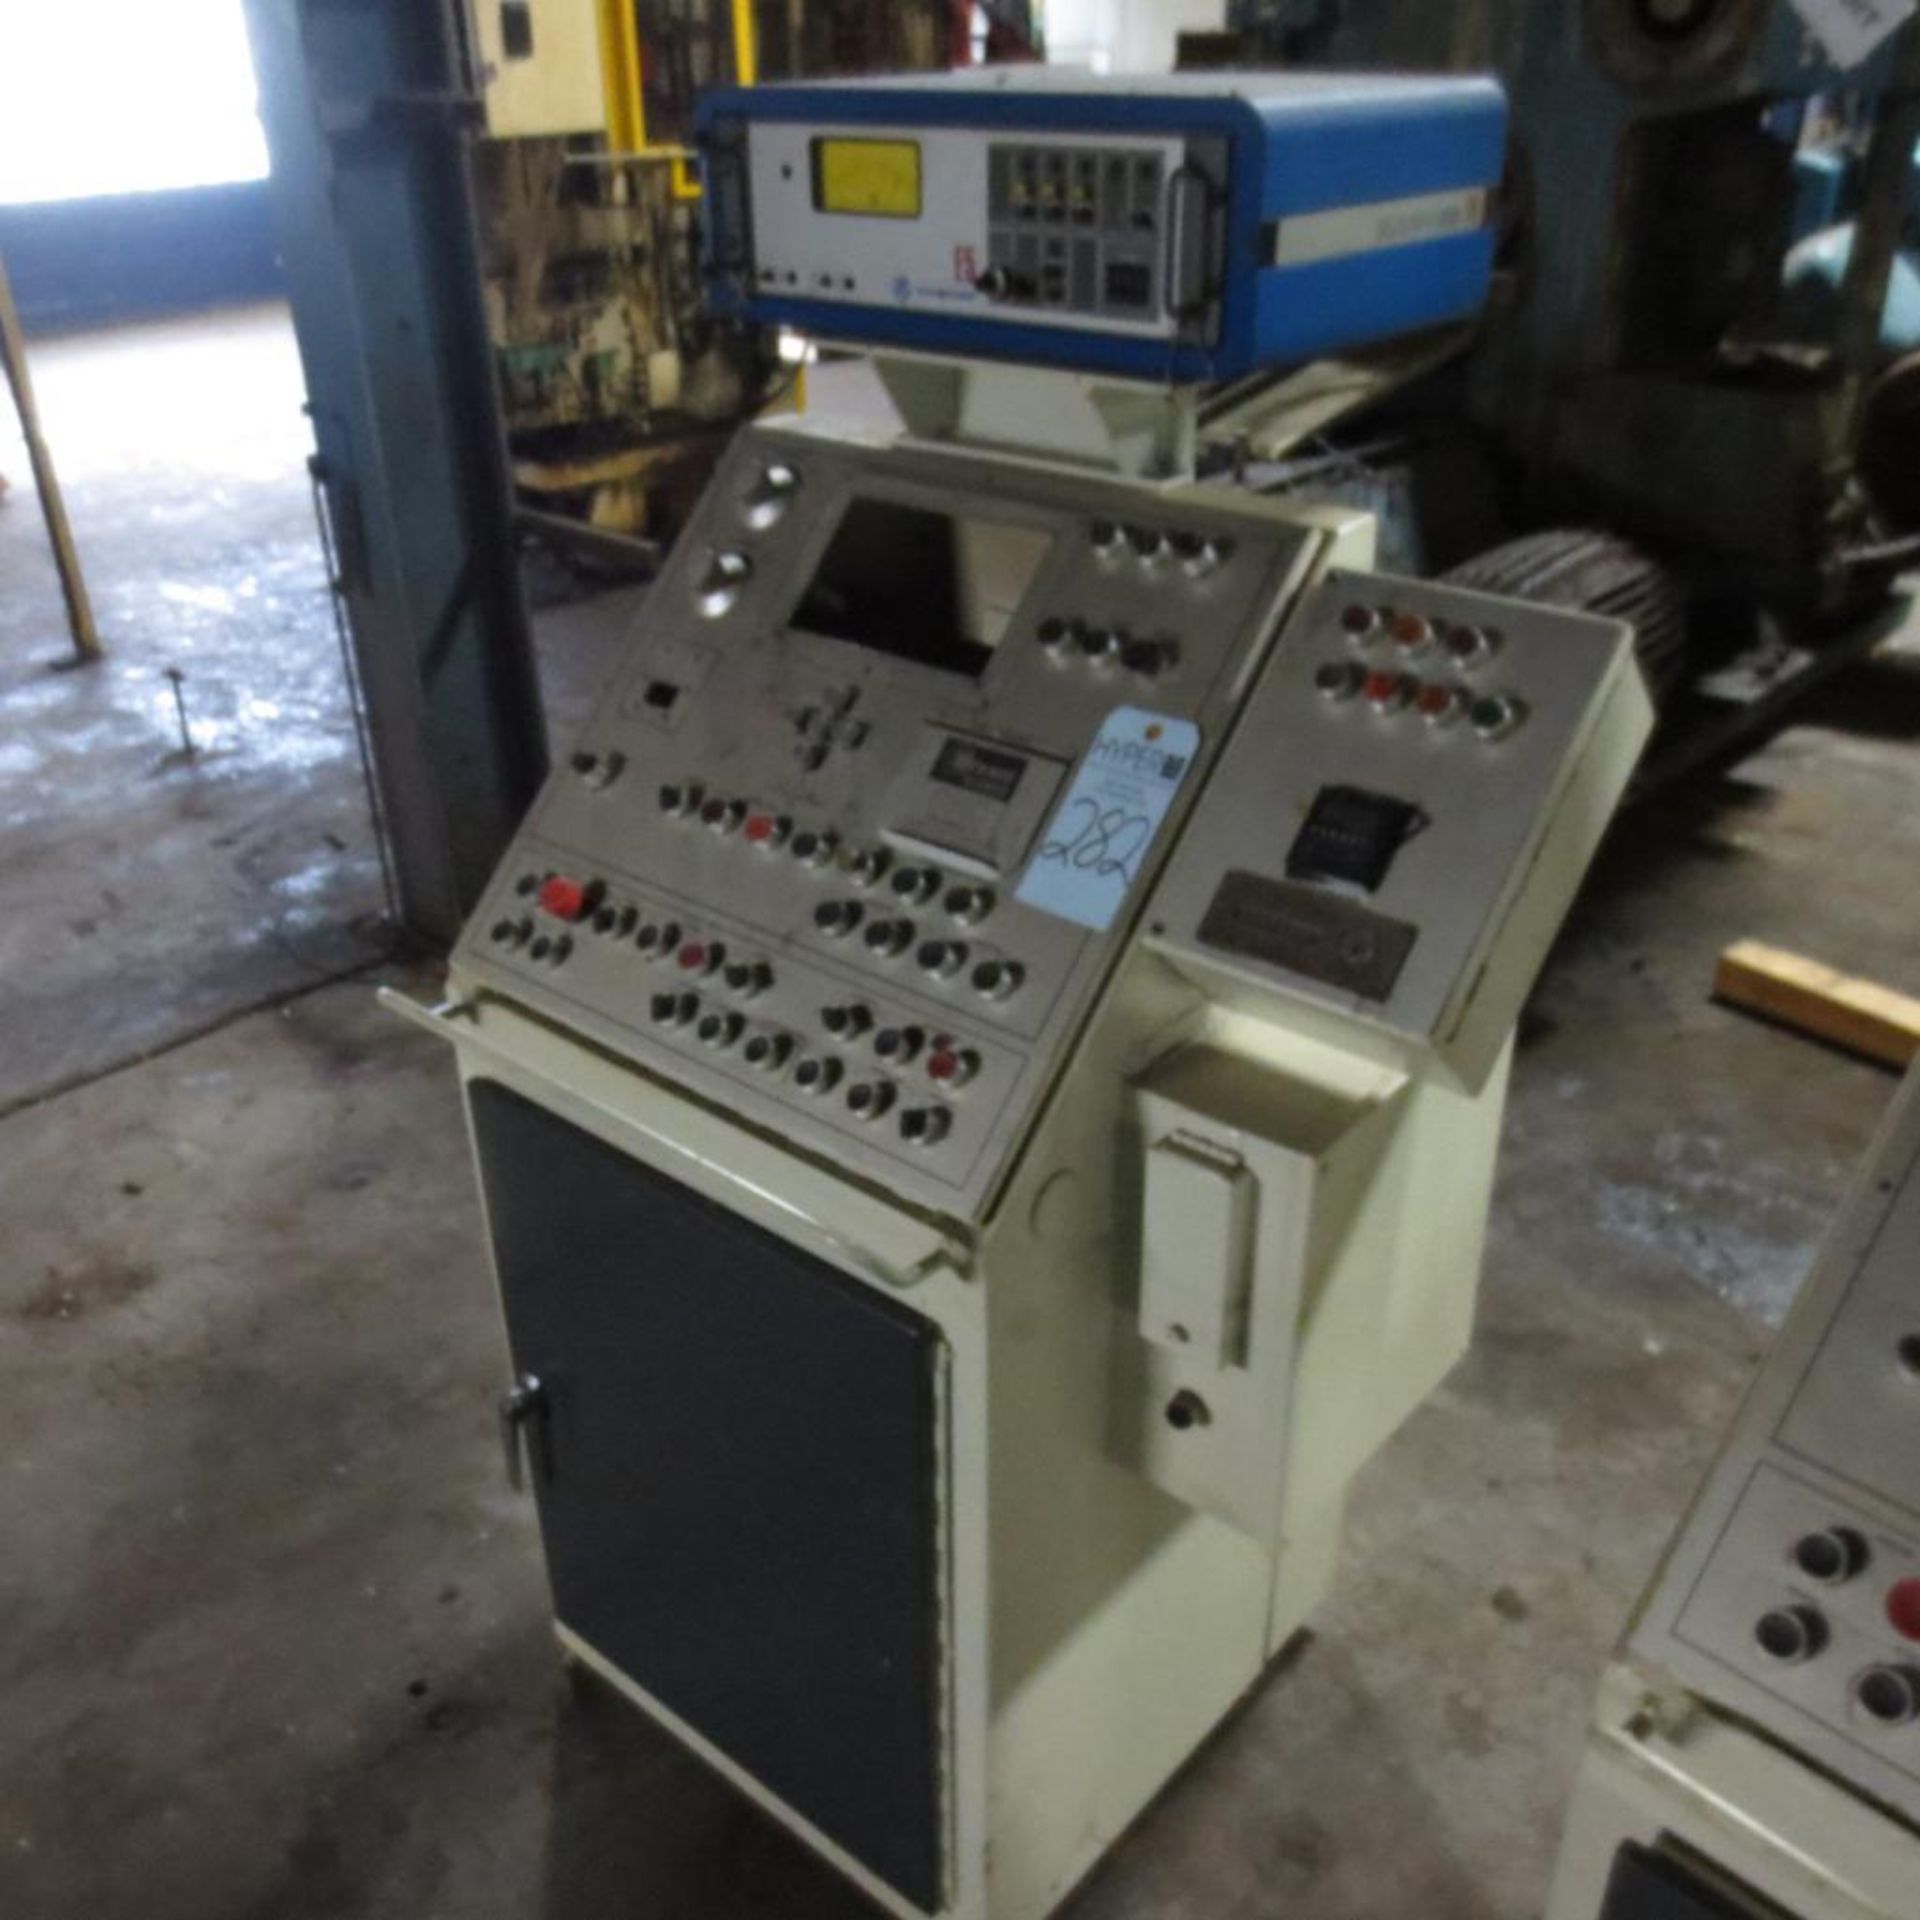 Bryant Excello CNC Control. Loadign Fee is $25.00